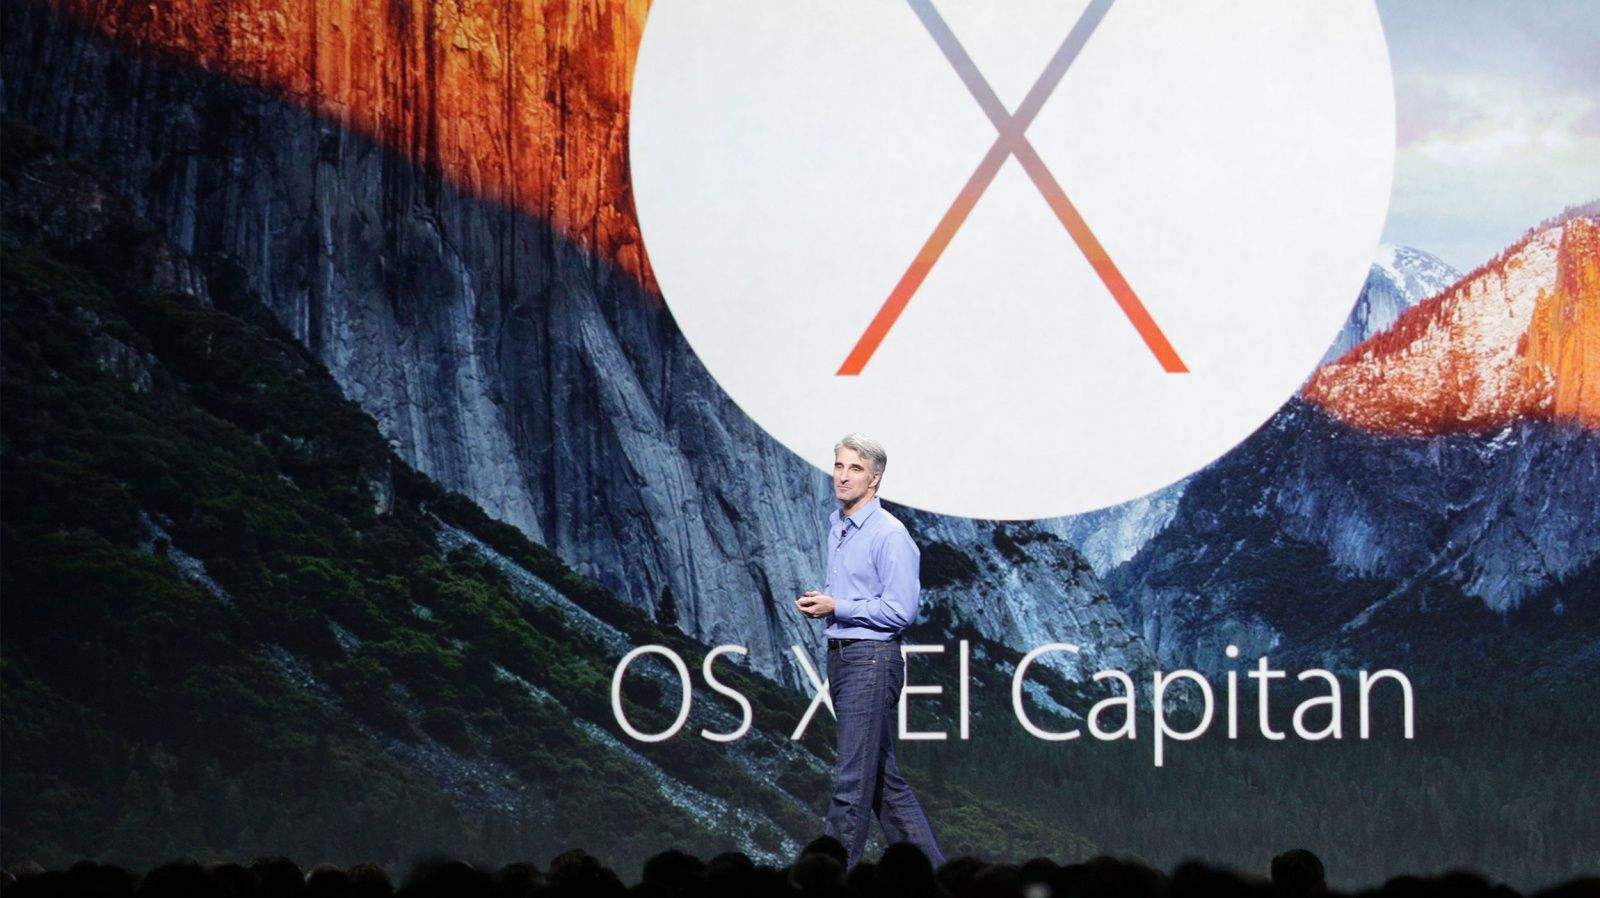 All the new features in OS X El Capitan